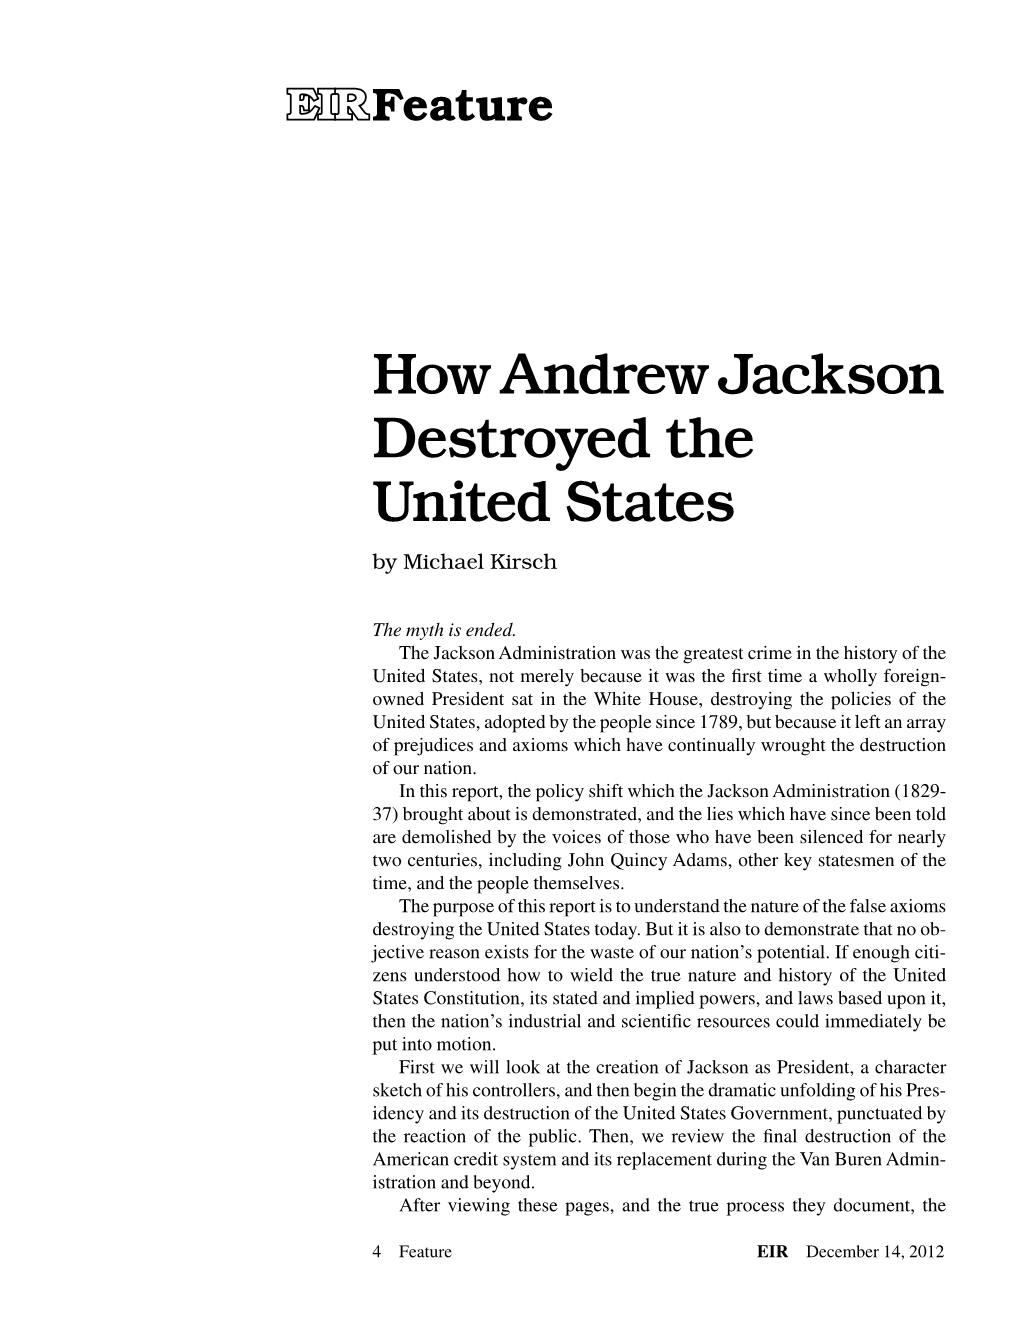 How Andrew Jackson Destroyed the United States by Michael Kirsch